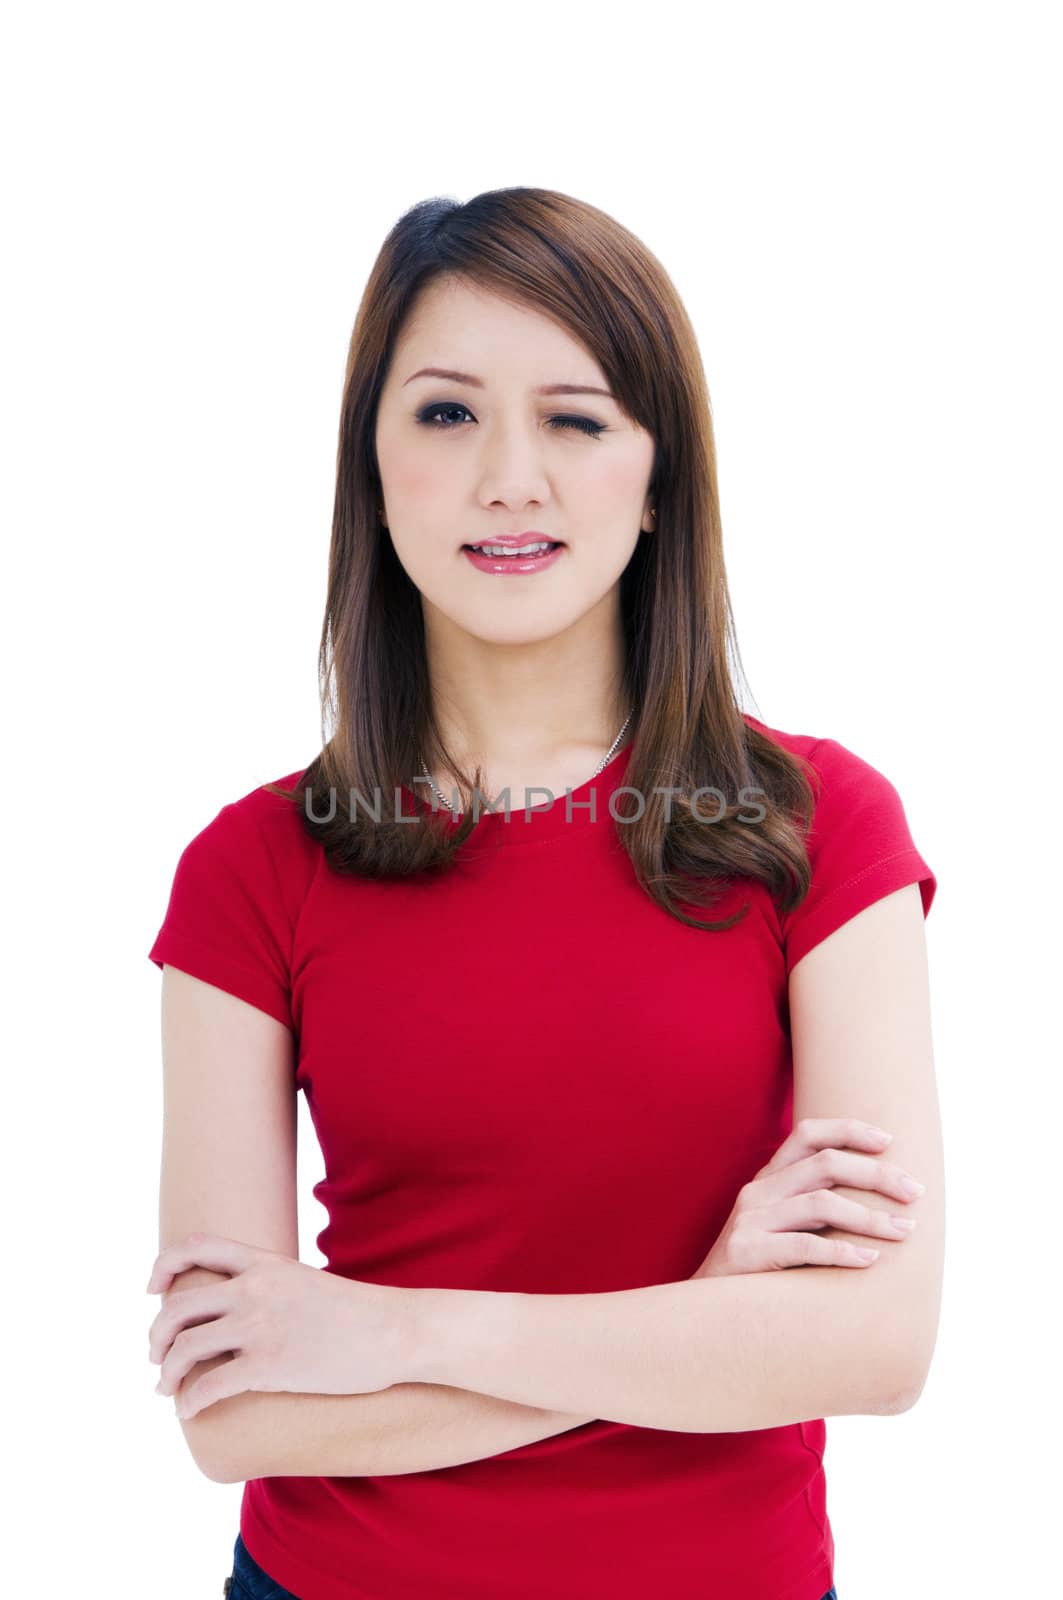 Portrait of an attractive young woman winking, isolated on white background.